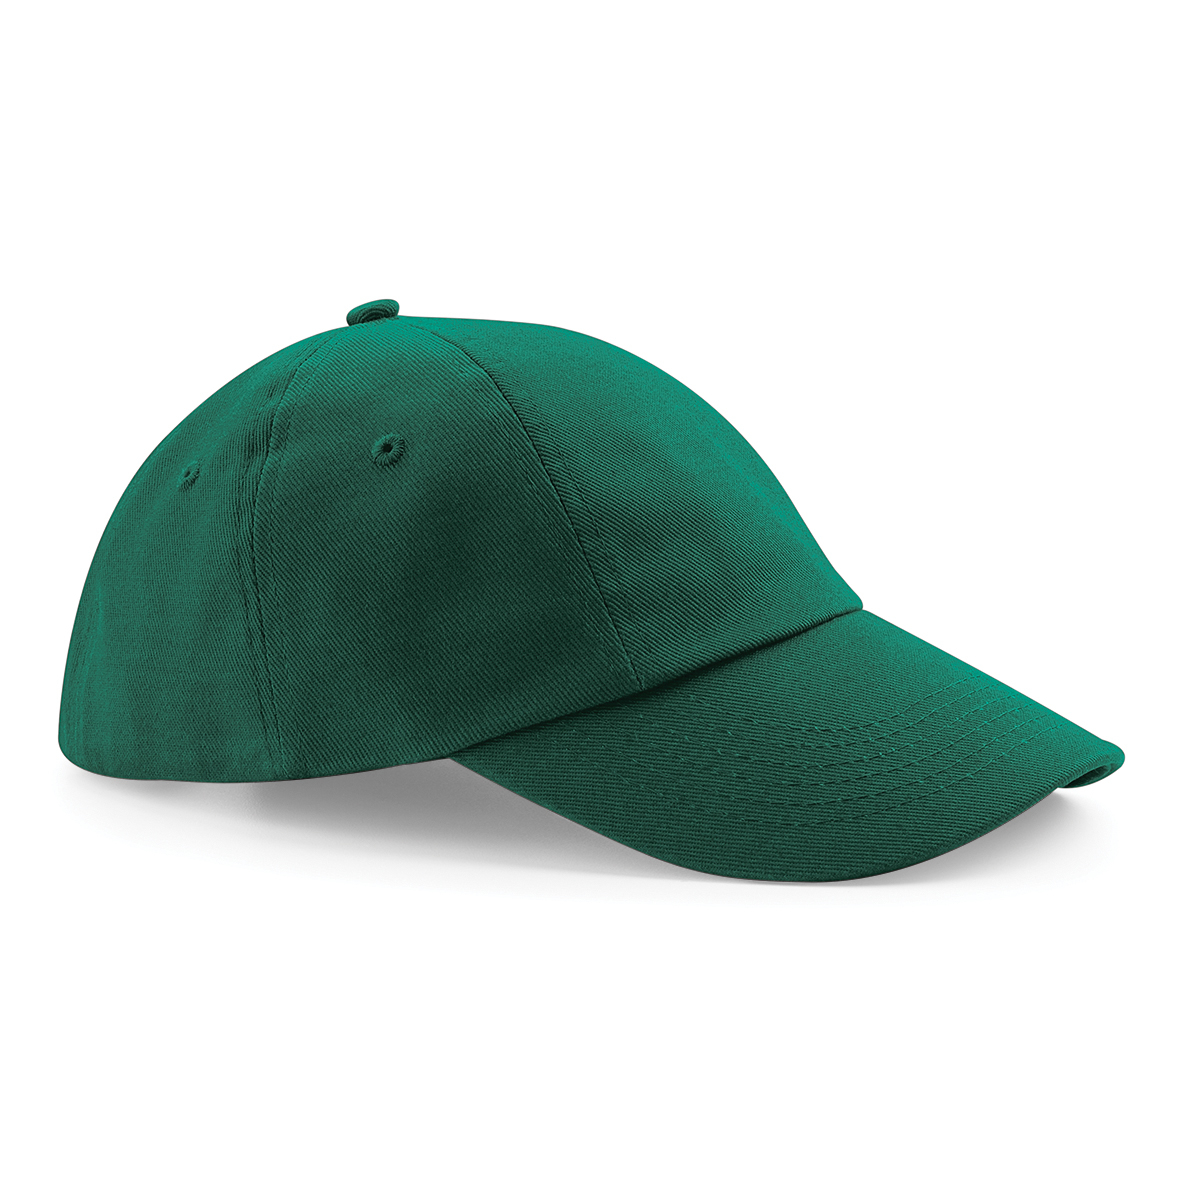 Low Profile Cap in green with seamless, centralised front panel